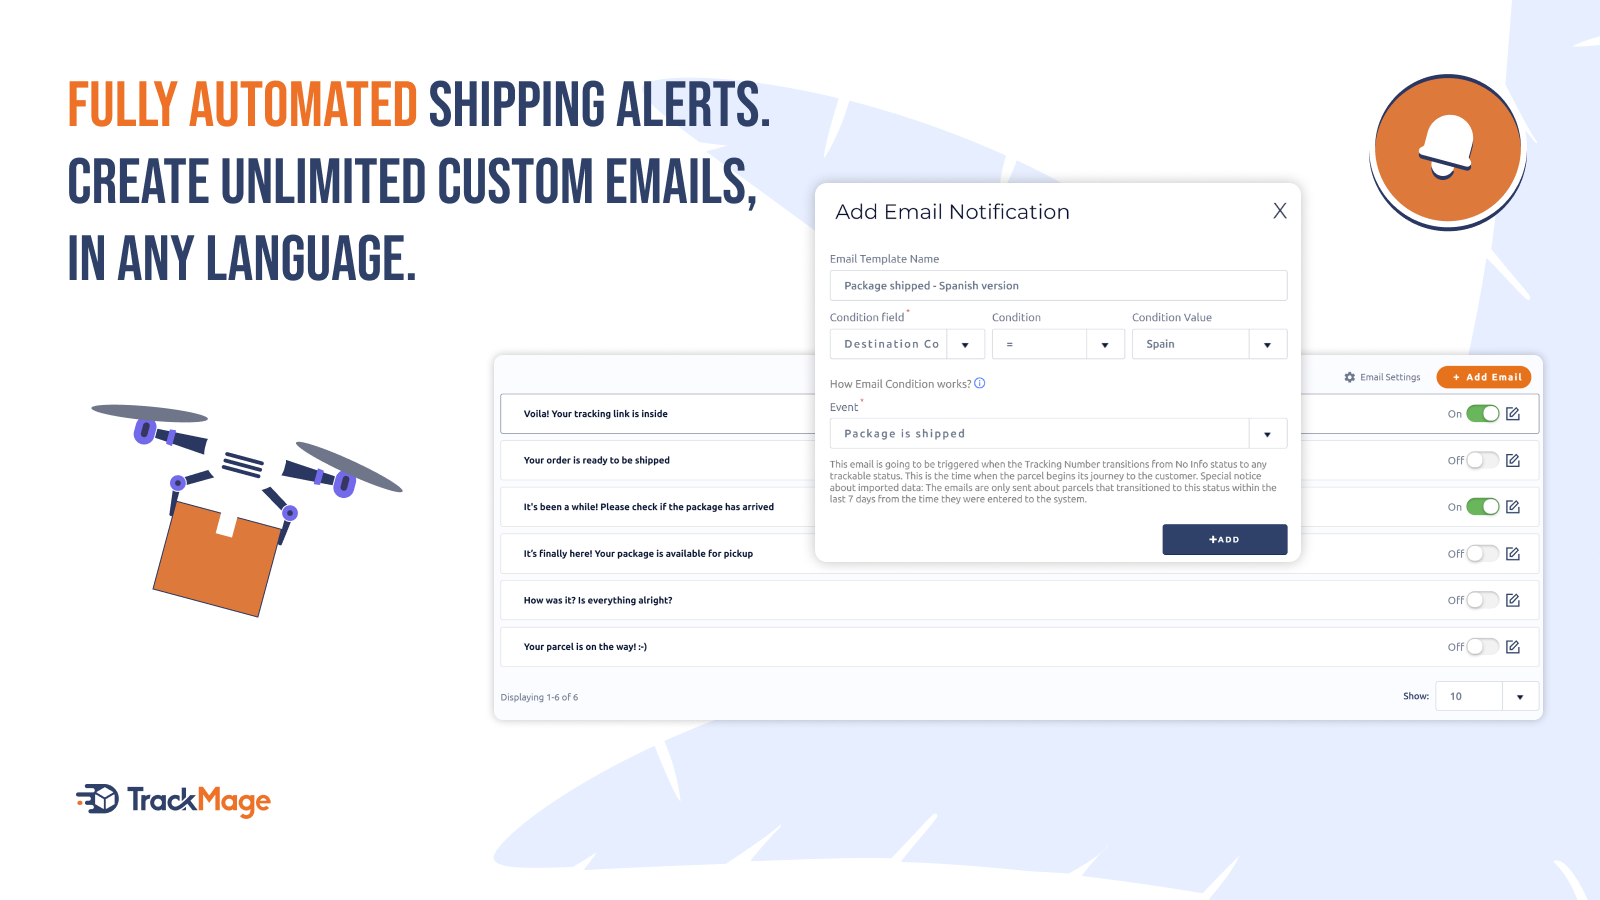  Fully automated shipping email notifications